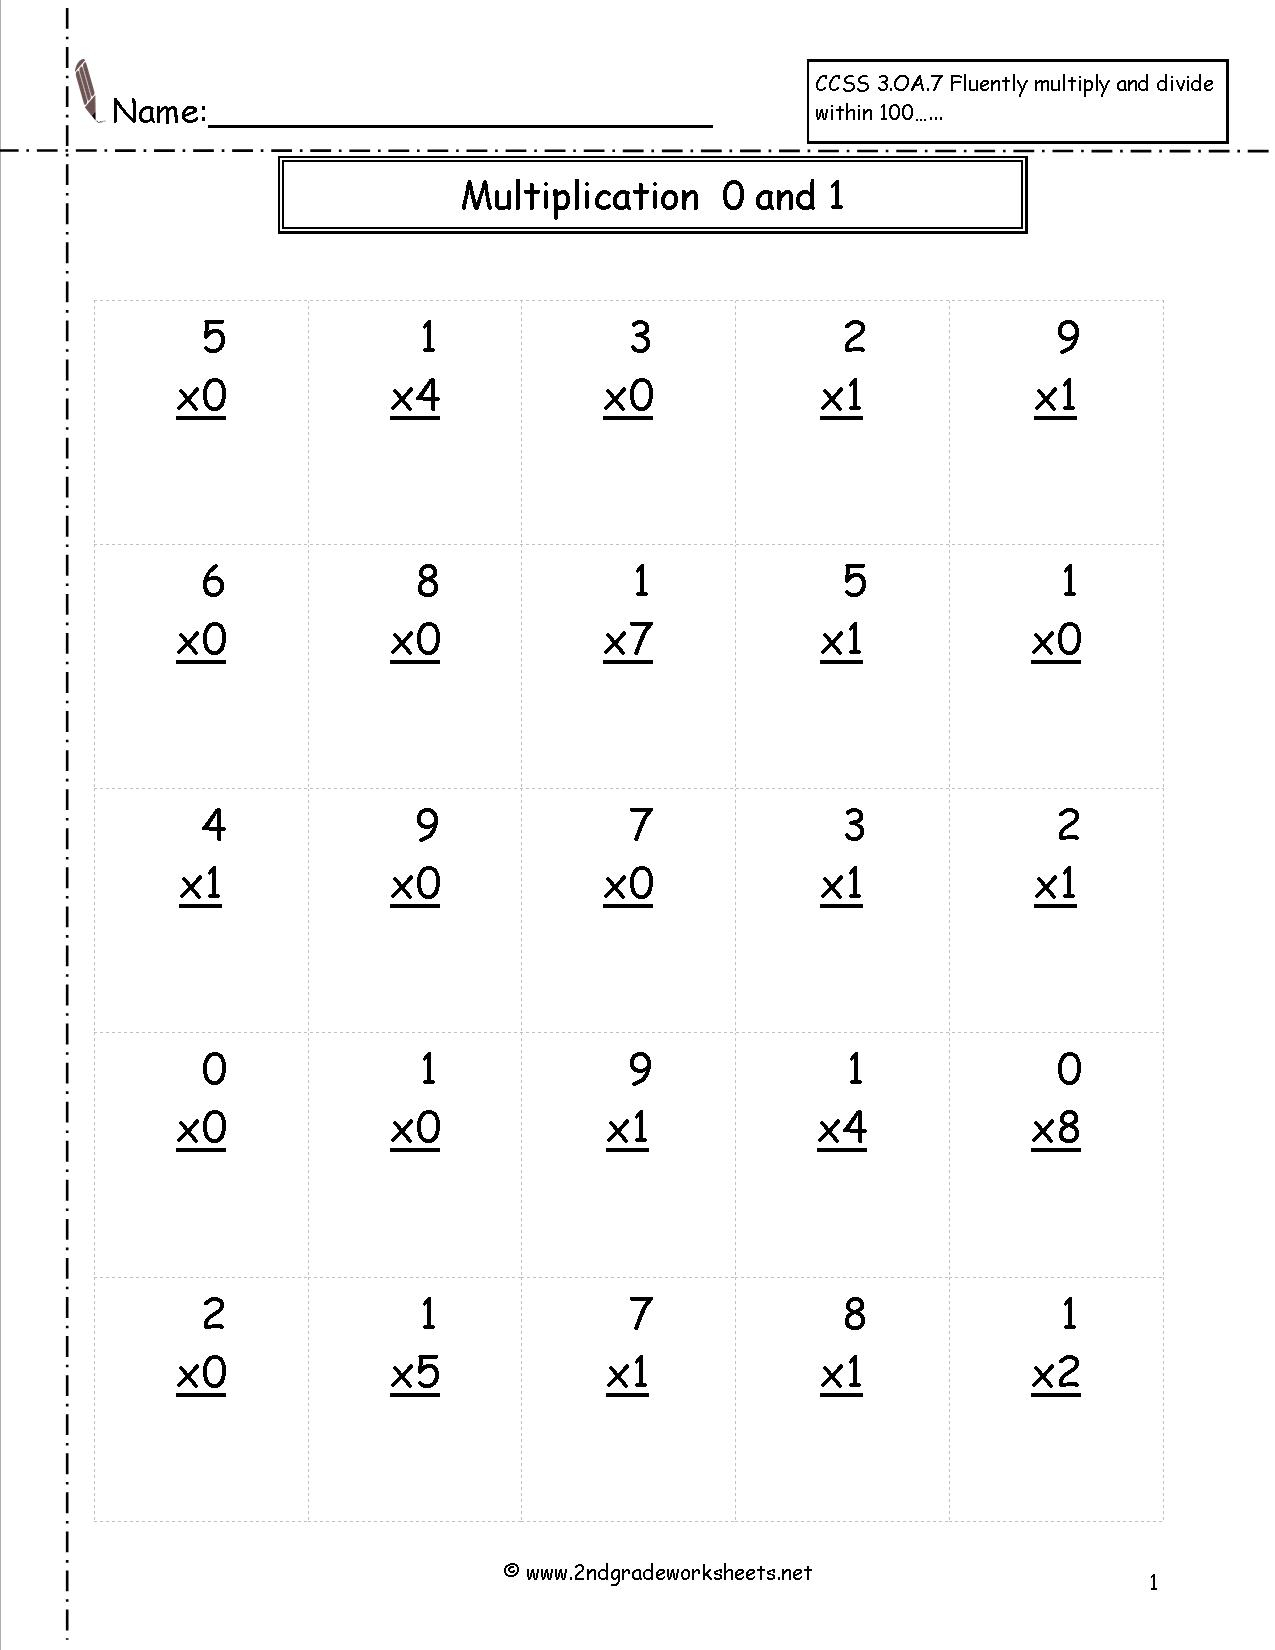 Multiplication Worksheets And Printouts for Multiplication Worksheets 2 And 3